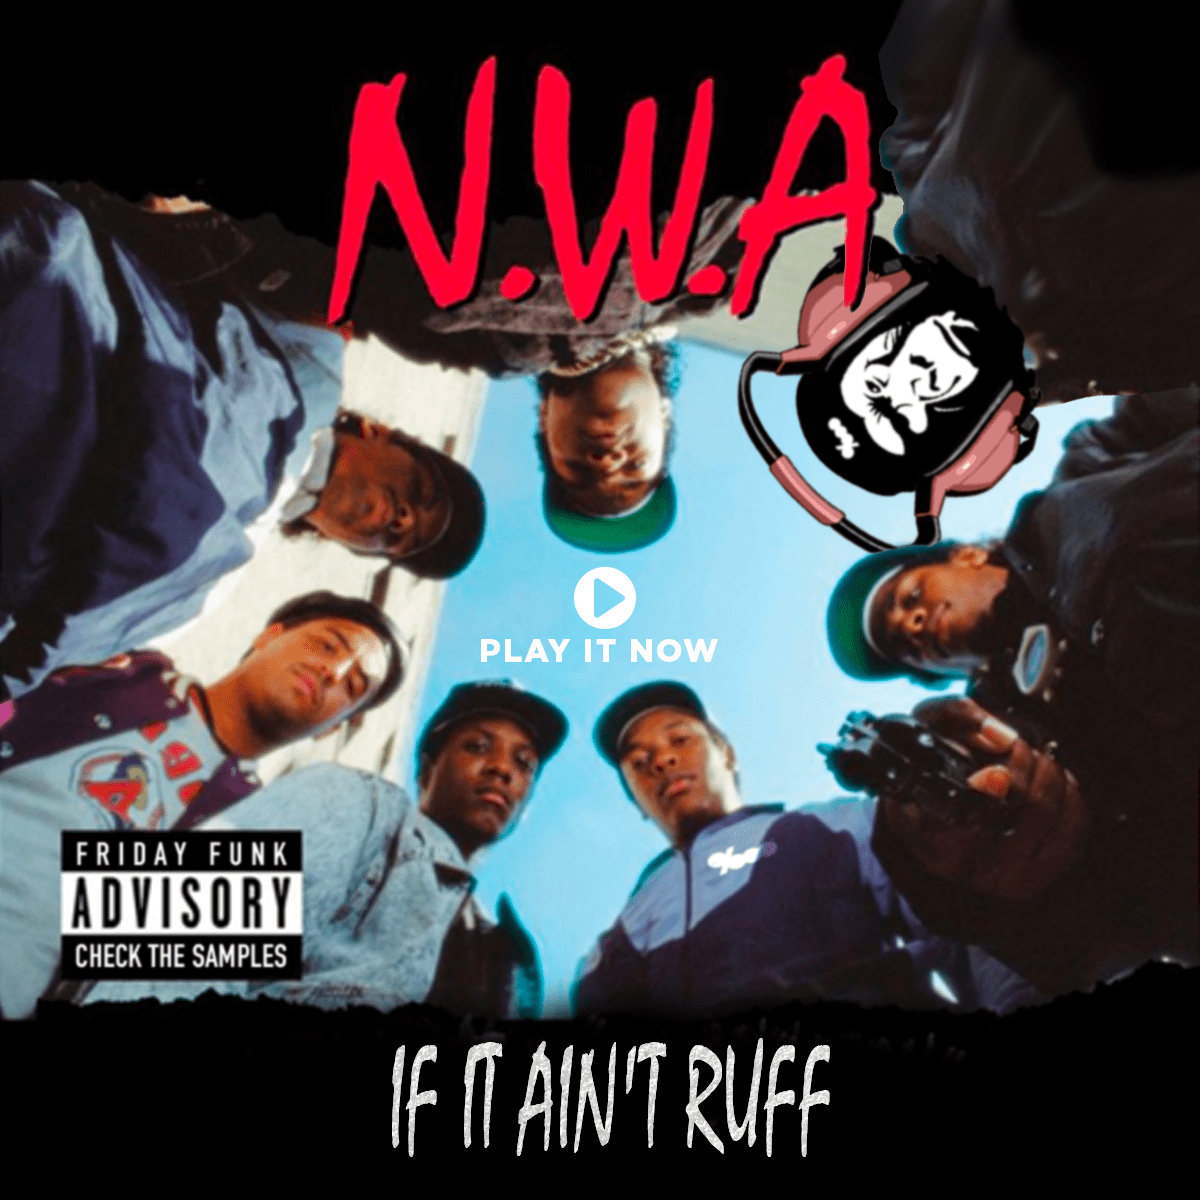 The Basis Point Friday Funk installment 115 - If It Ain't Ruff by NWA - play it now